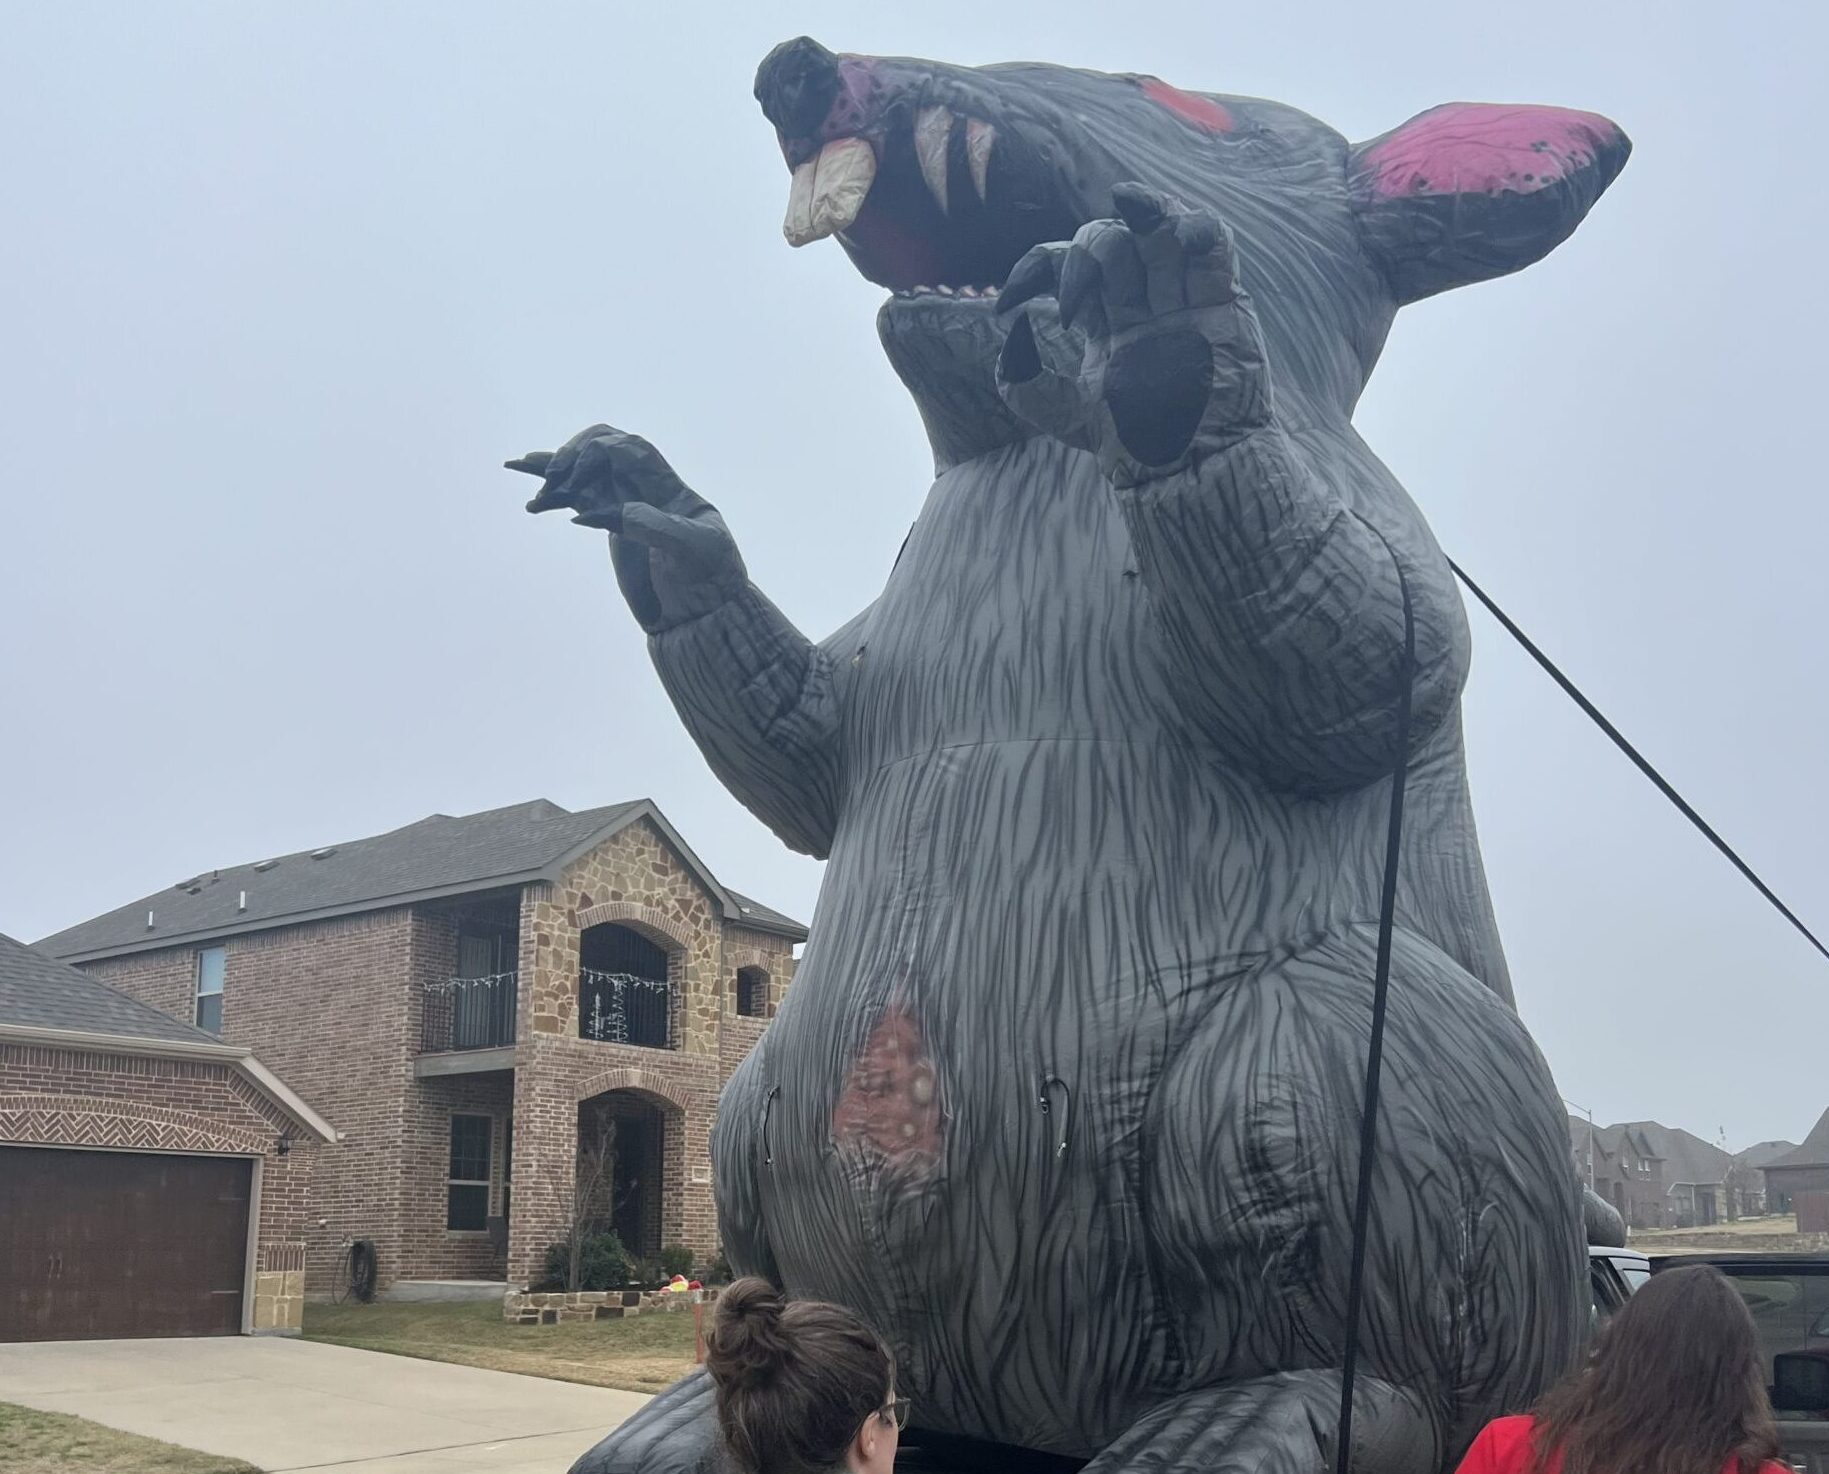 Two people inspect a giant inflatable rat strapped to a truck bed in front of an large house in a residential neighborhood.